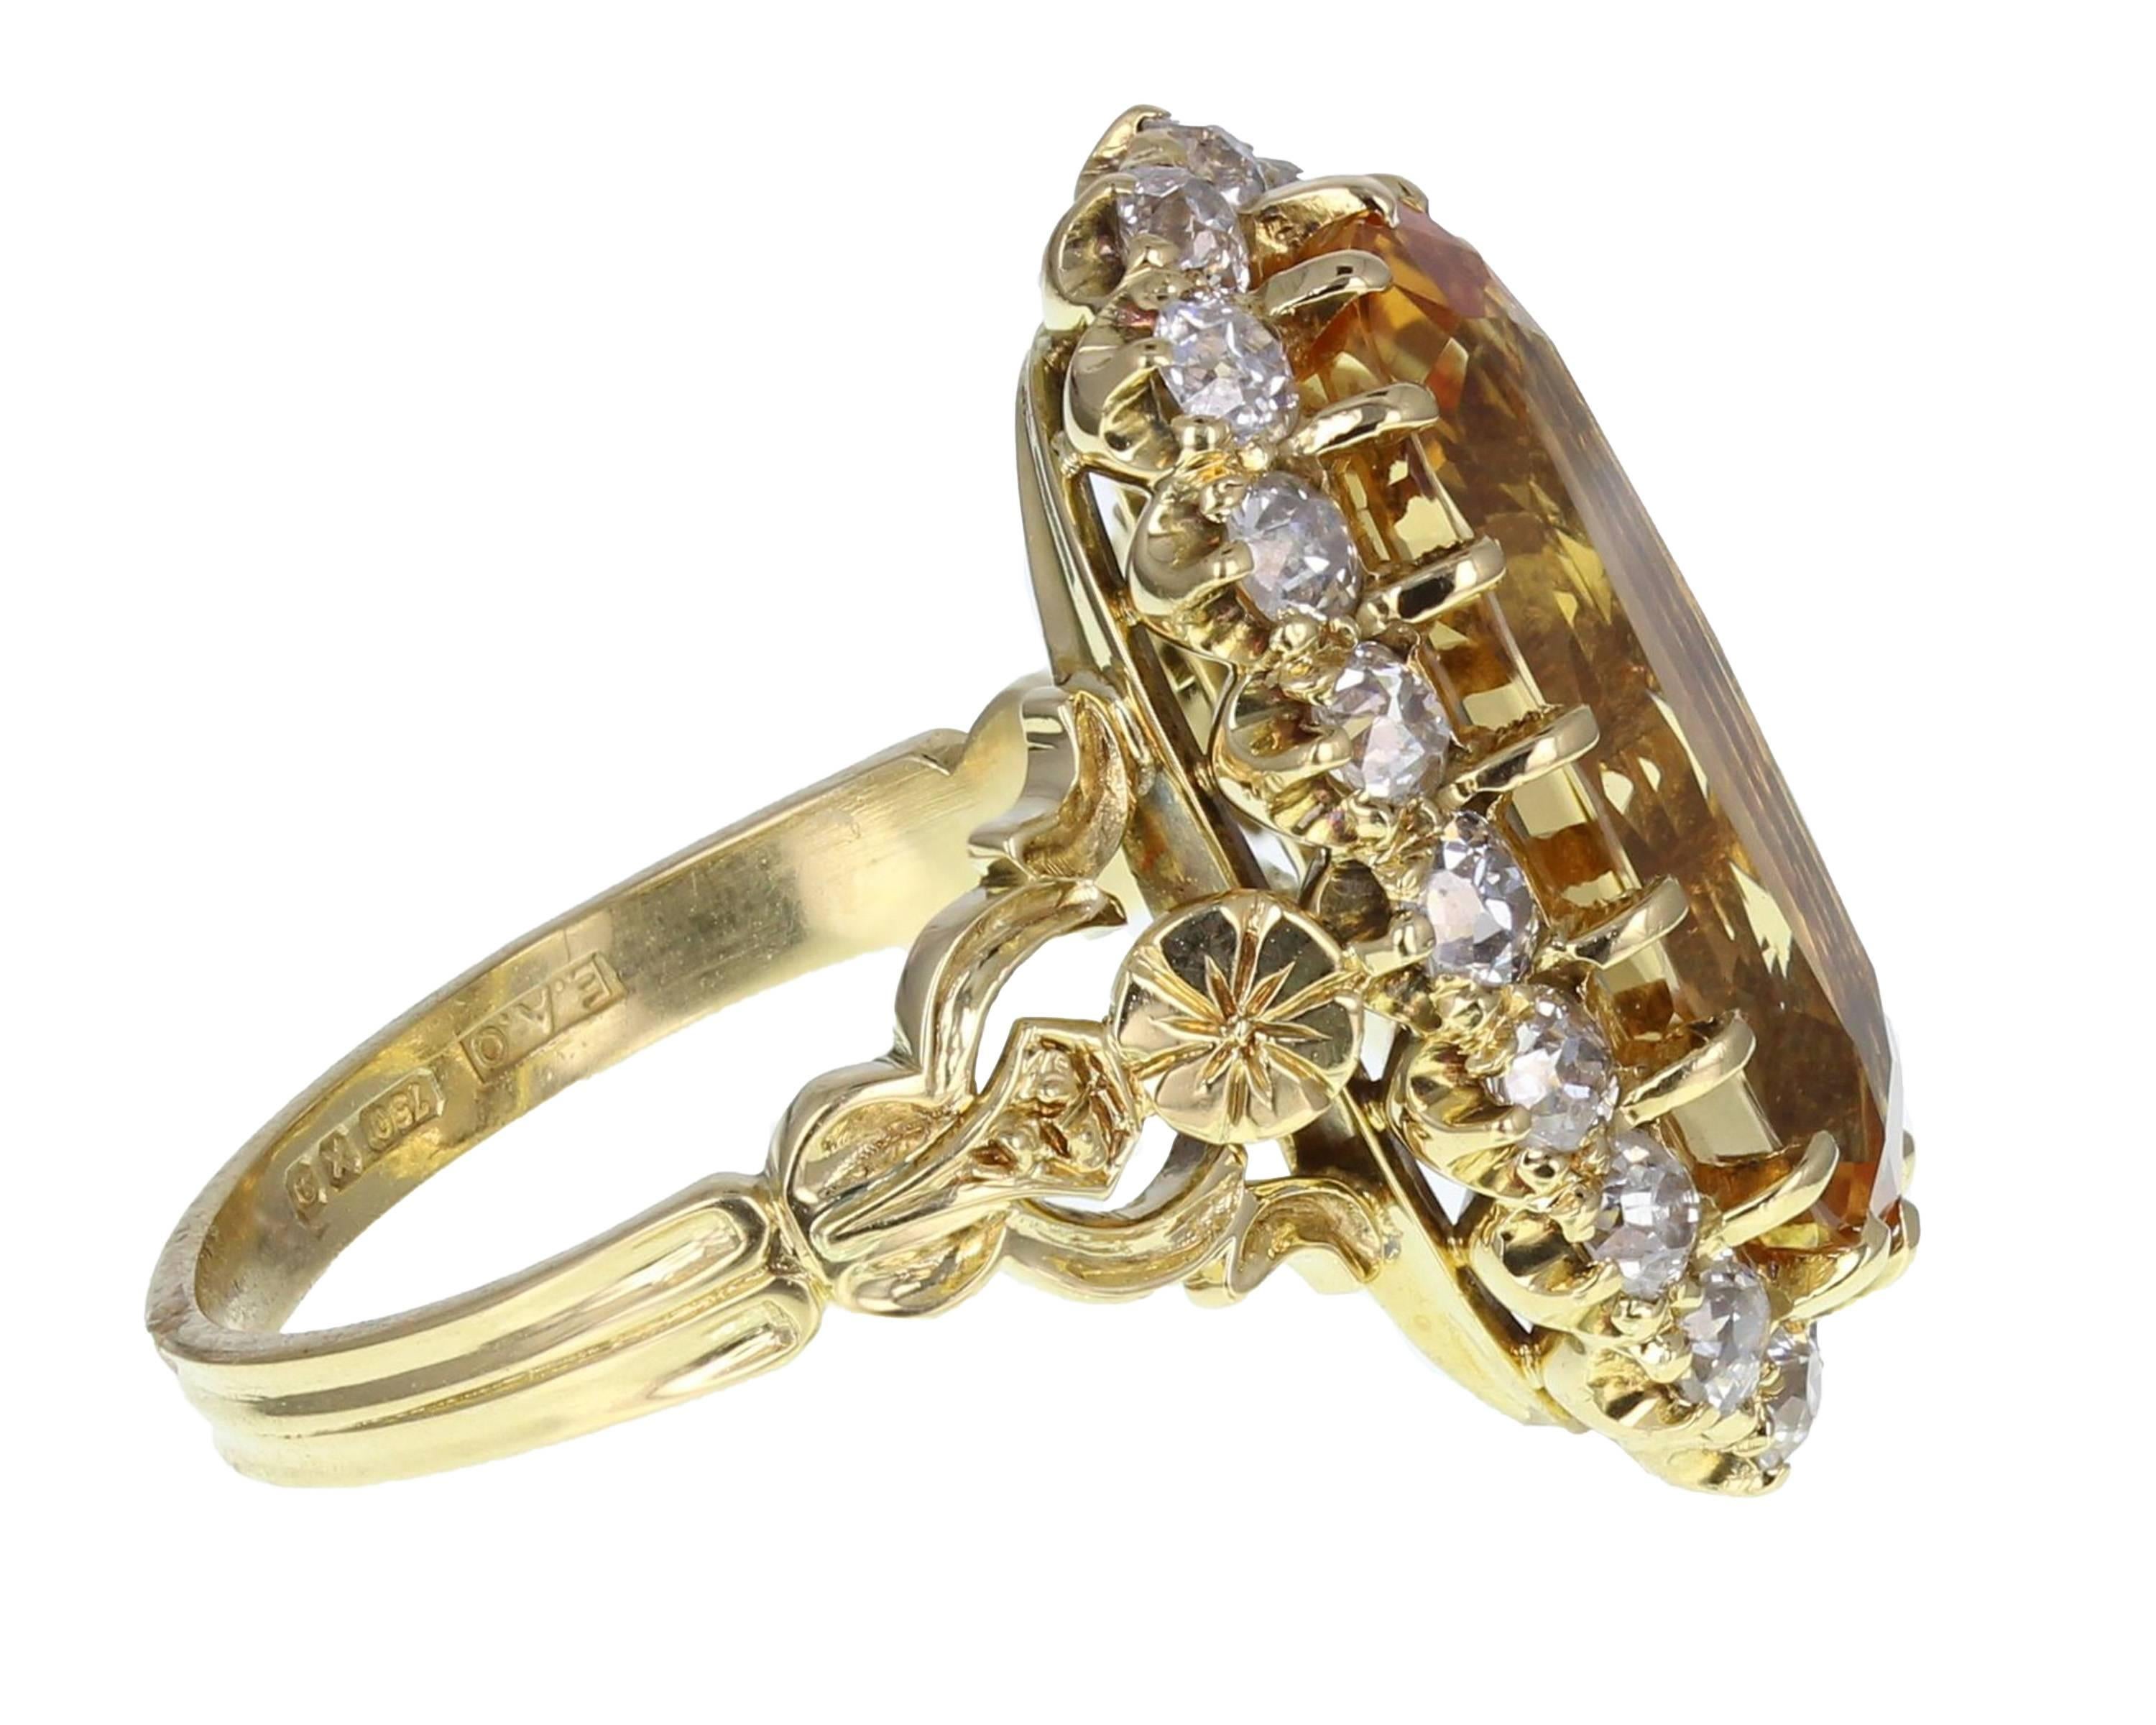 This beautiful, lozenge shaped cluster ring in 18-carat yellow gold is a fine example of early 1900's style. The long, oval brilliant-cut yellow Topaz has beautiful honey tones that are perfectly complimented by the fancy 18-carat yellow shoulders.